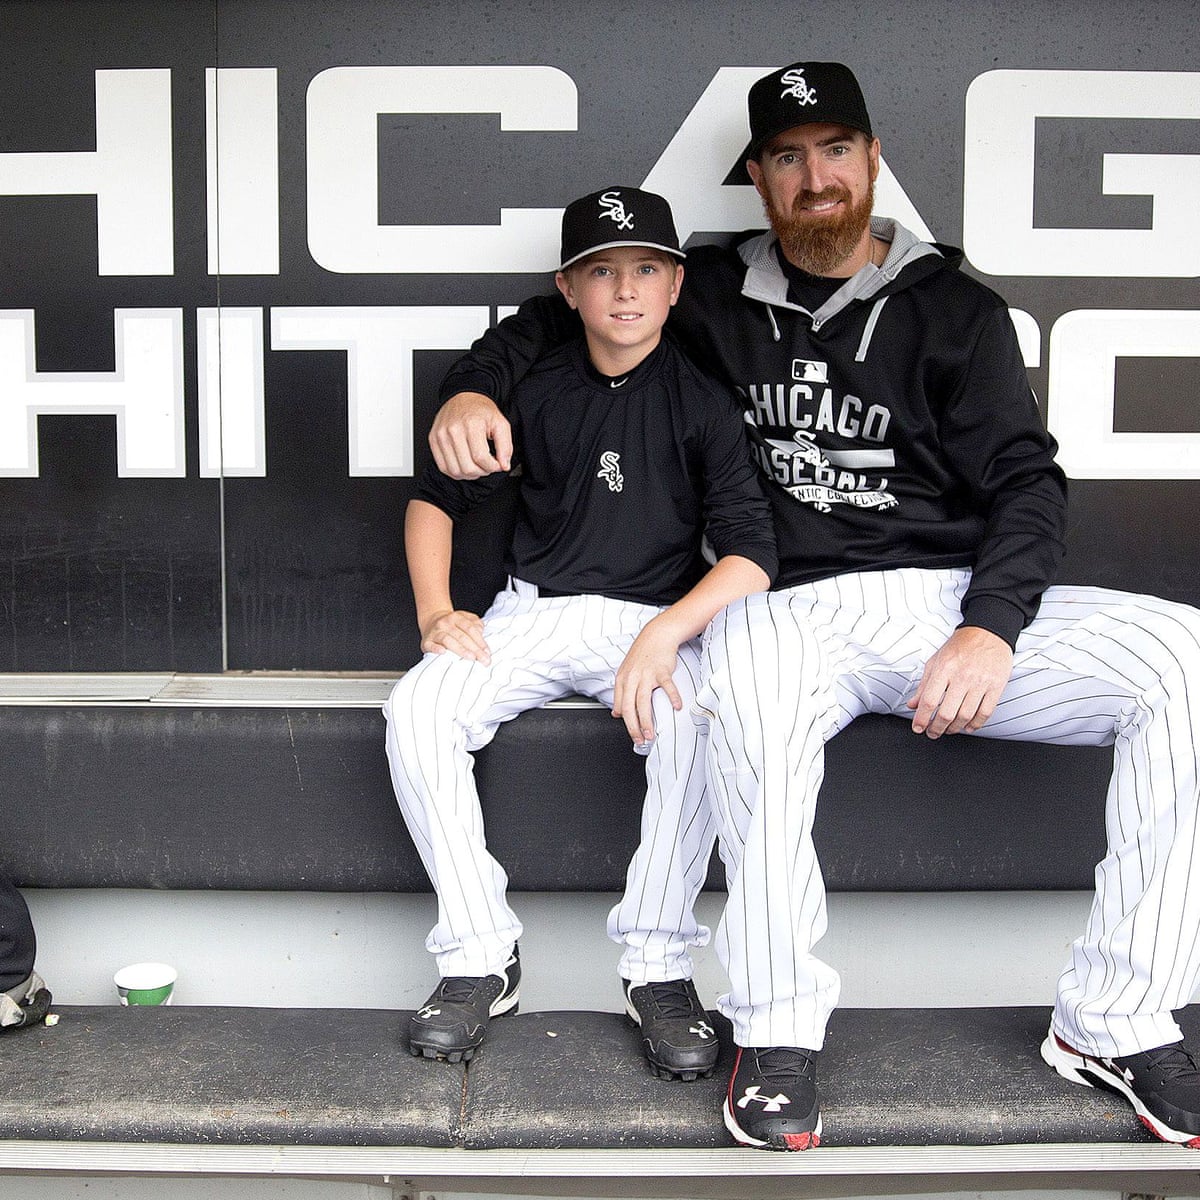 Adam LaRoche had to decide between $13m and his son - the choice